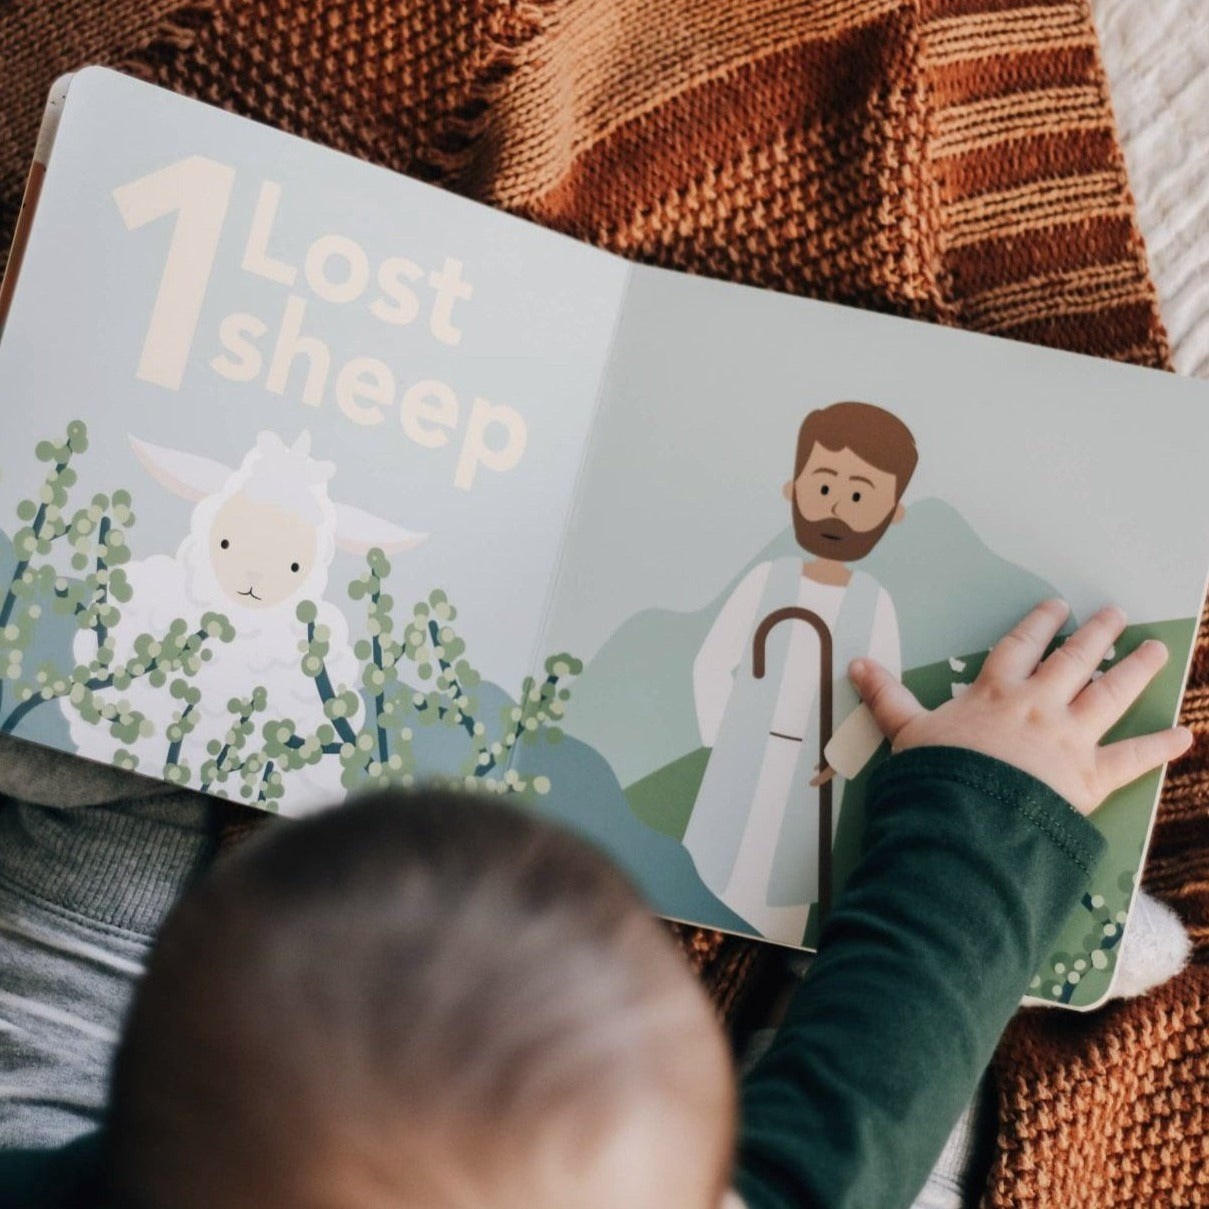 The Daily Grace Co. | Counting Through the Bible - Children&#39;s Board Book